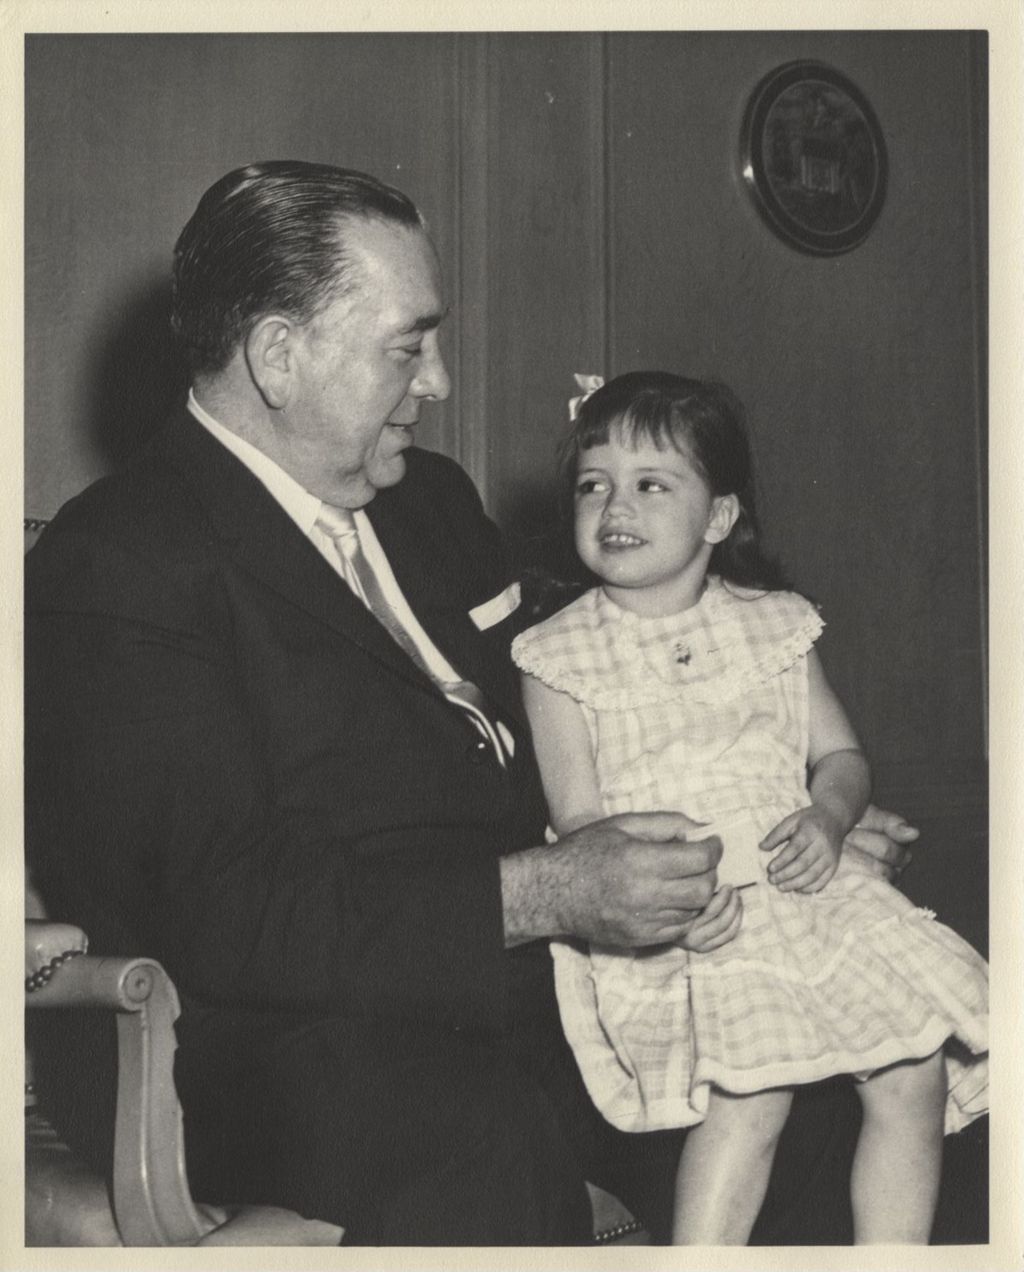 Richard J. Daley with a young girl